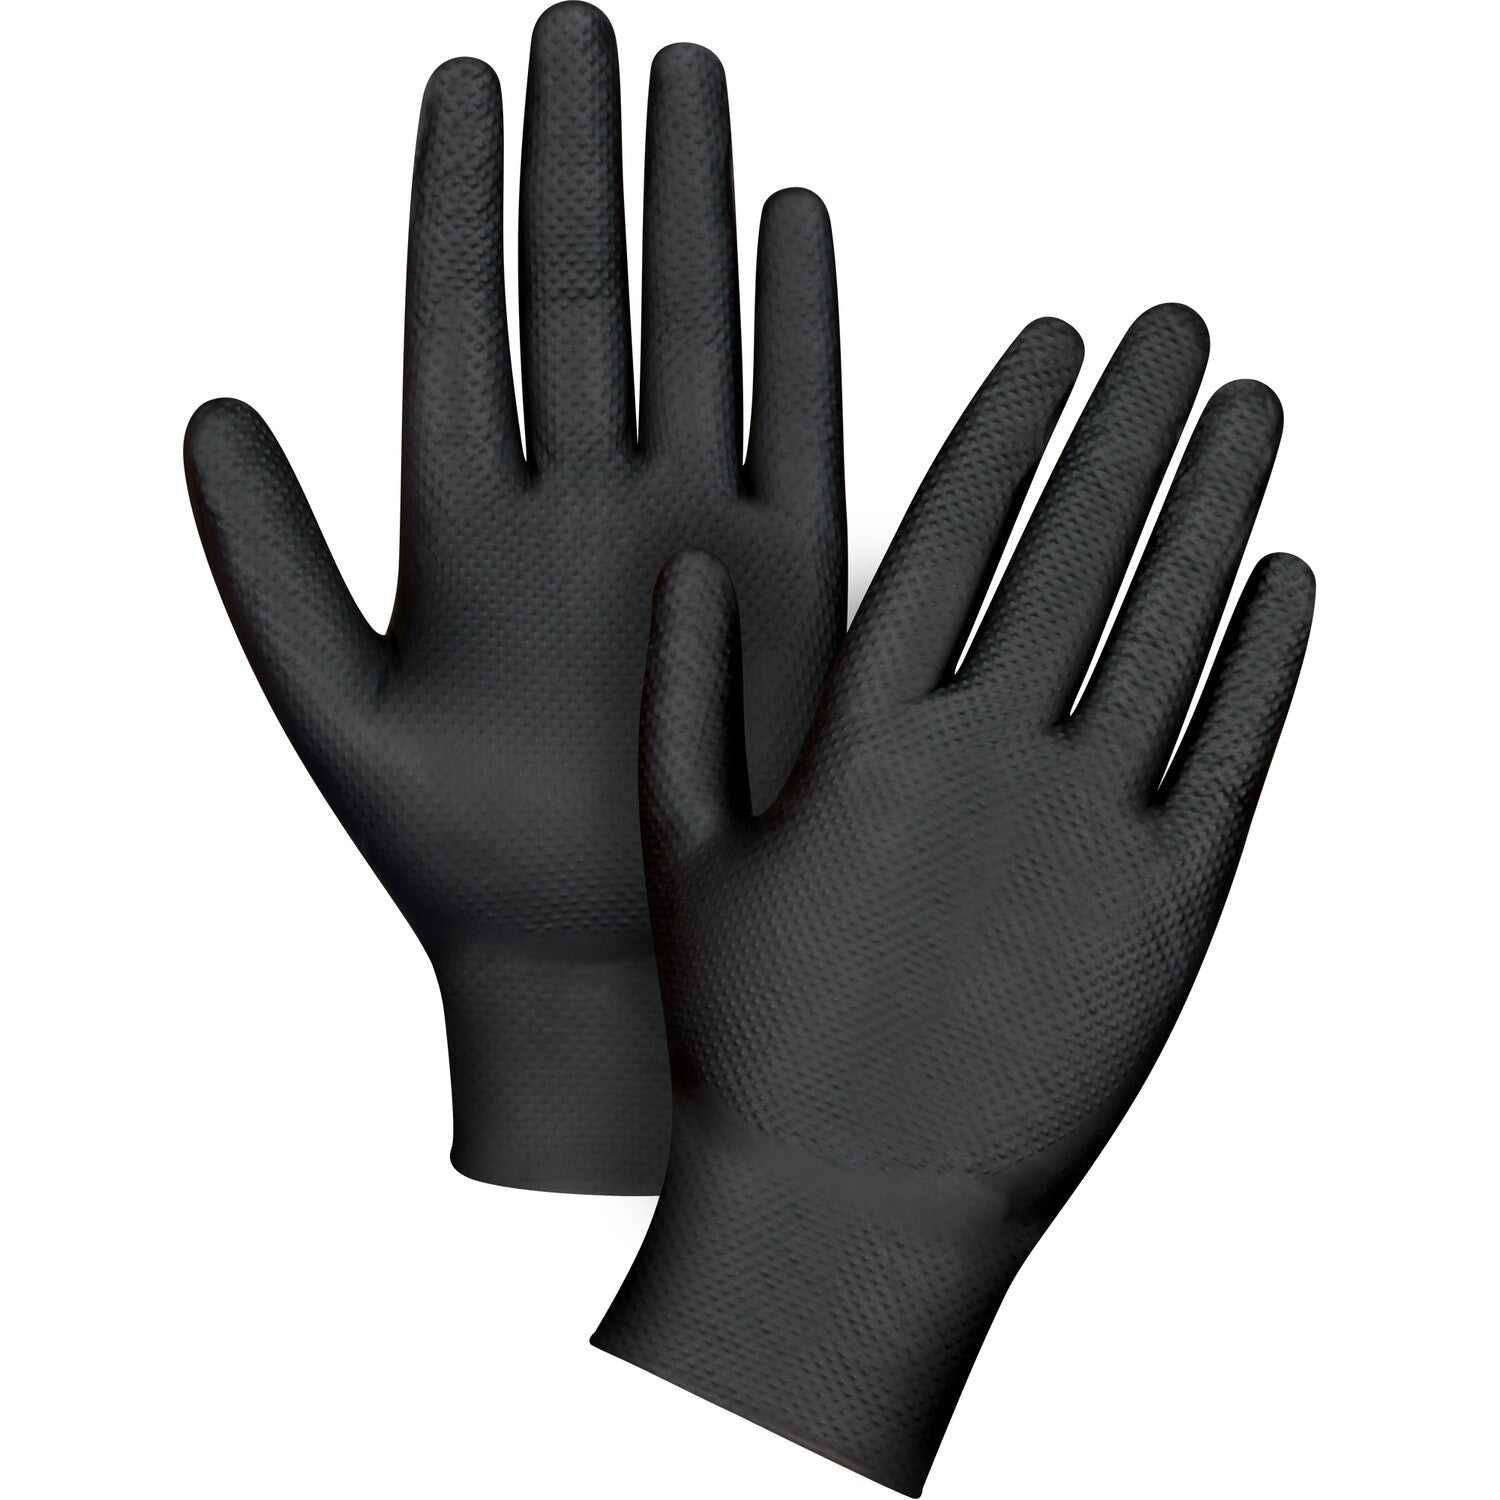 Nitrile Gloves - Medical Grade Disposable , 5-mil, Powder-Free, Black, Class 2 (Case of 10 boxes of 100 pcs) - CYANvisuals